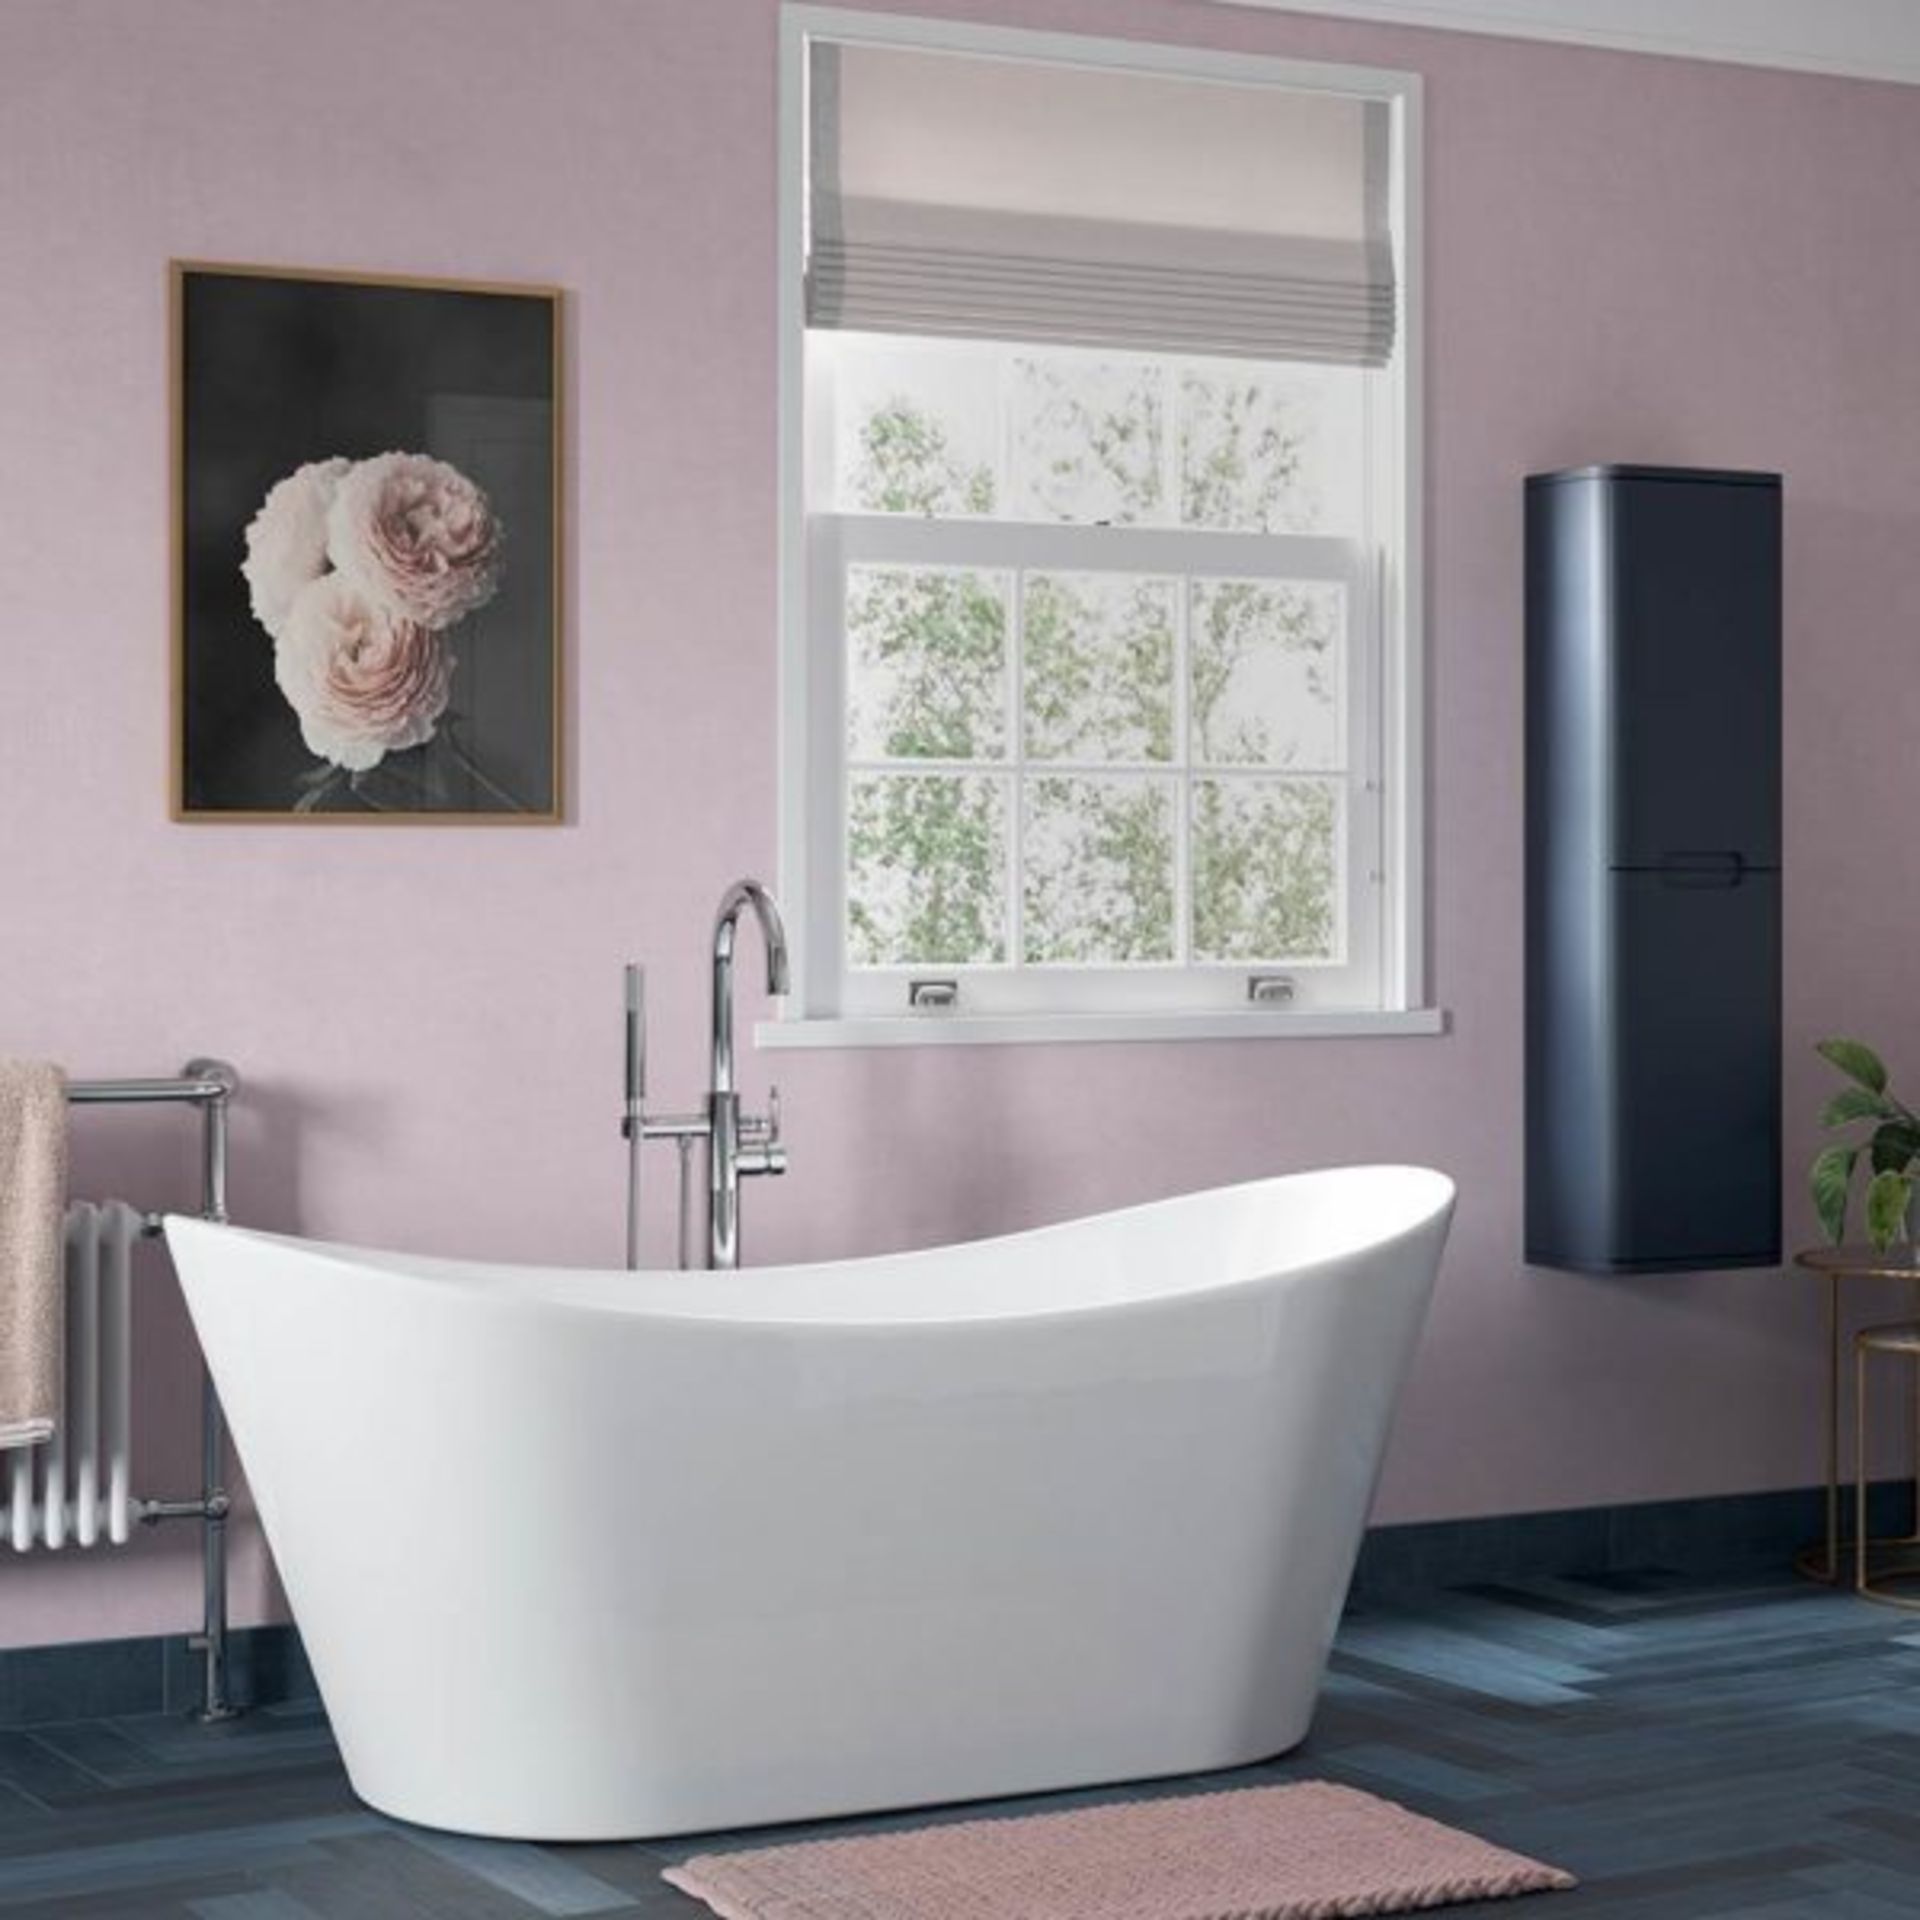 NEW (M3) 1700mmx780mm Belmont Freestanding Bath. RRP £2,999.Visually simplistic to suit any b... - Image 2 of 3